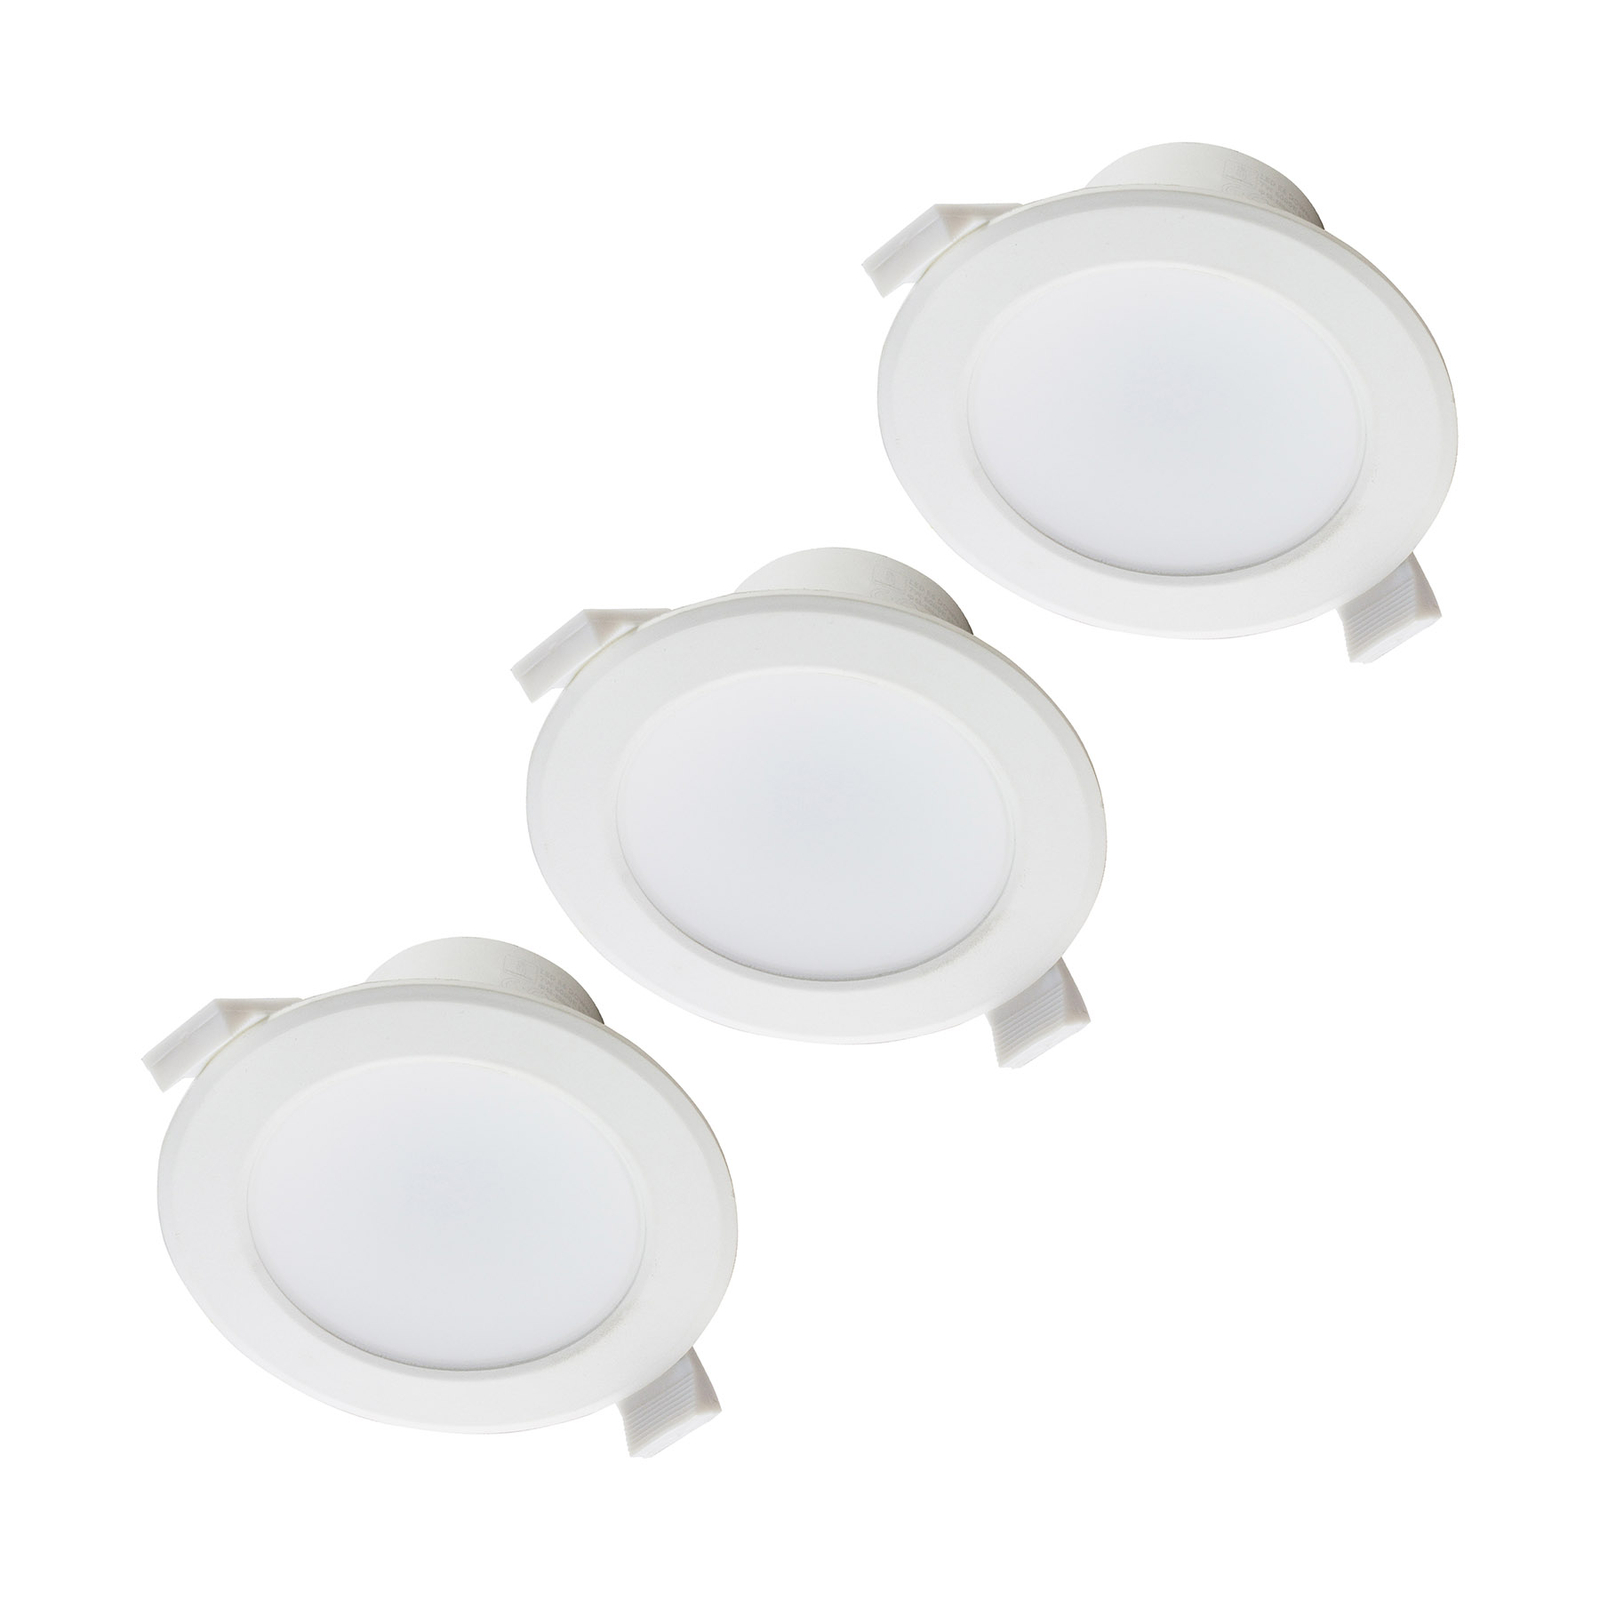 Prios LED recessed light Rida, 19cm, 18W, set of 3, CCT, dimmable